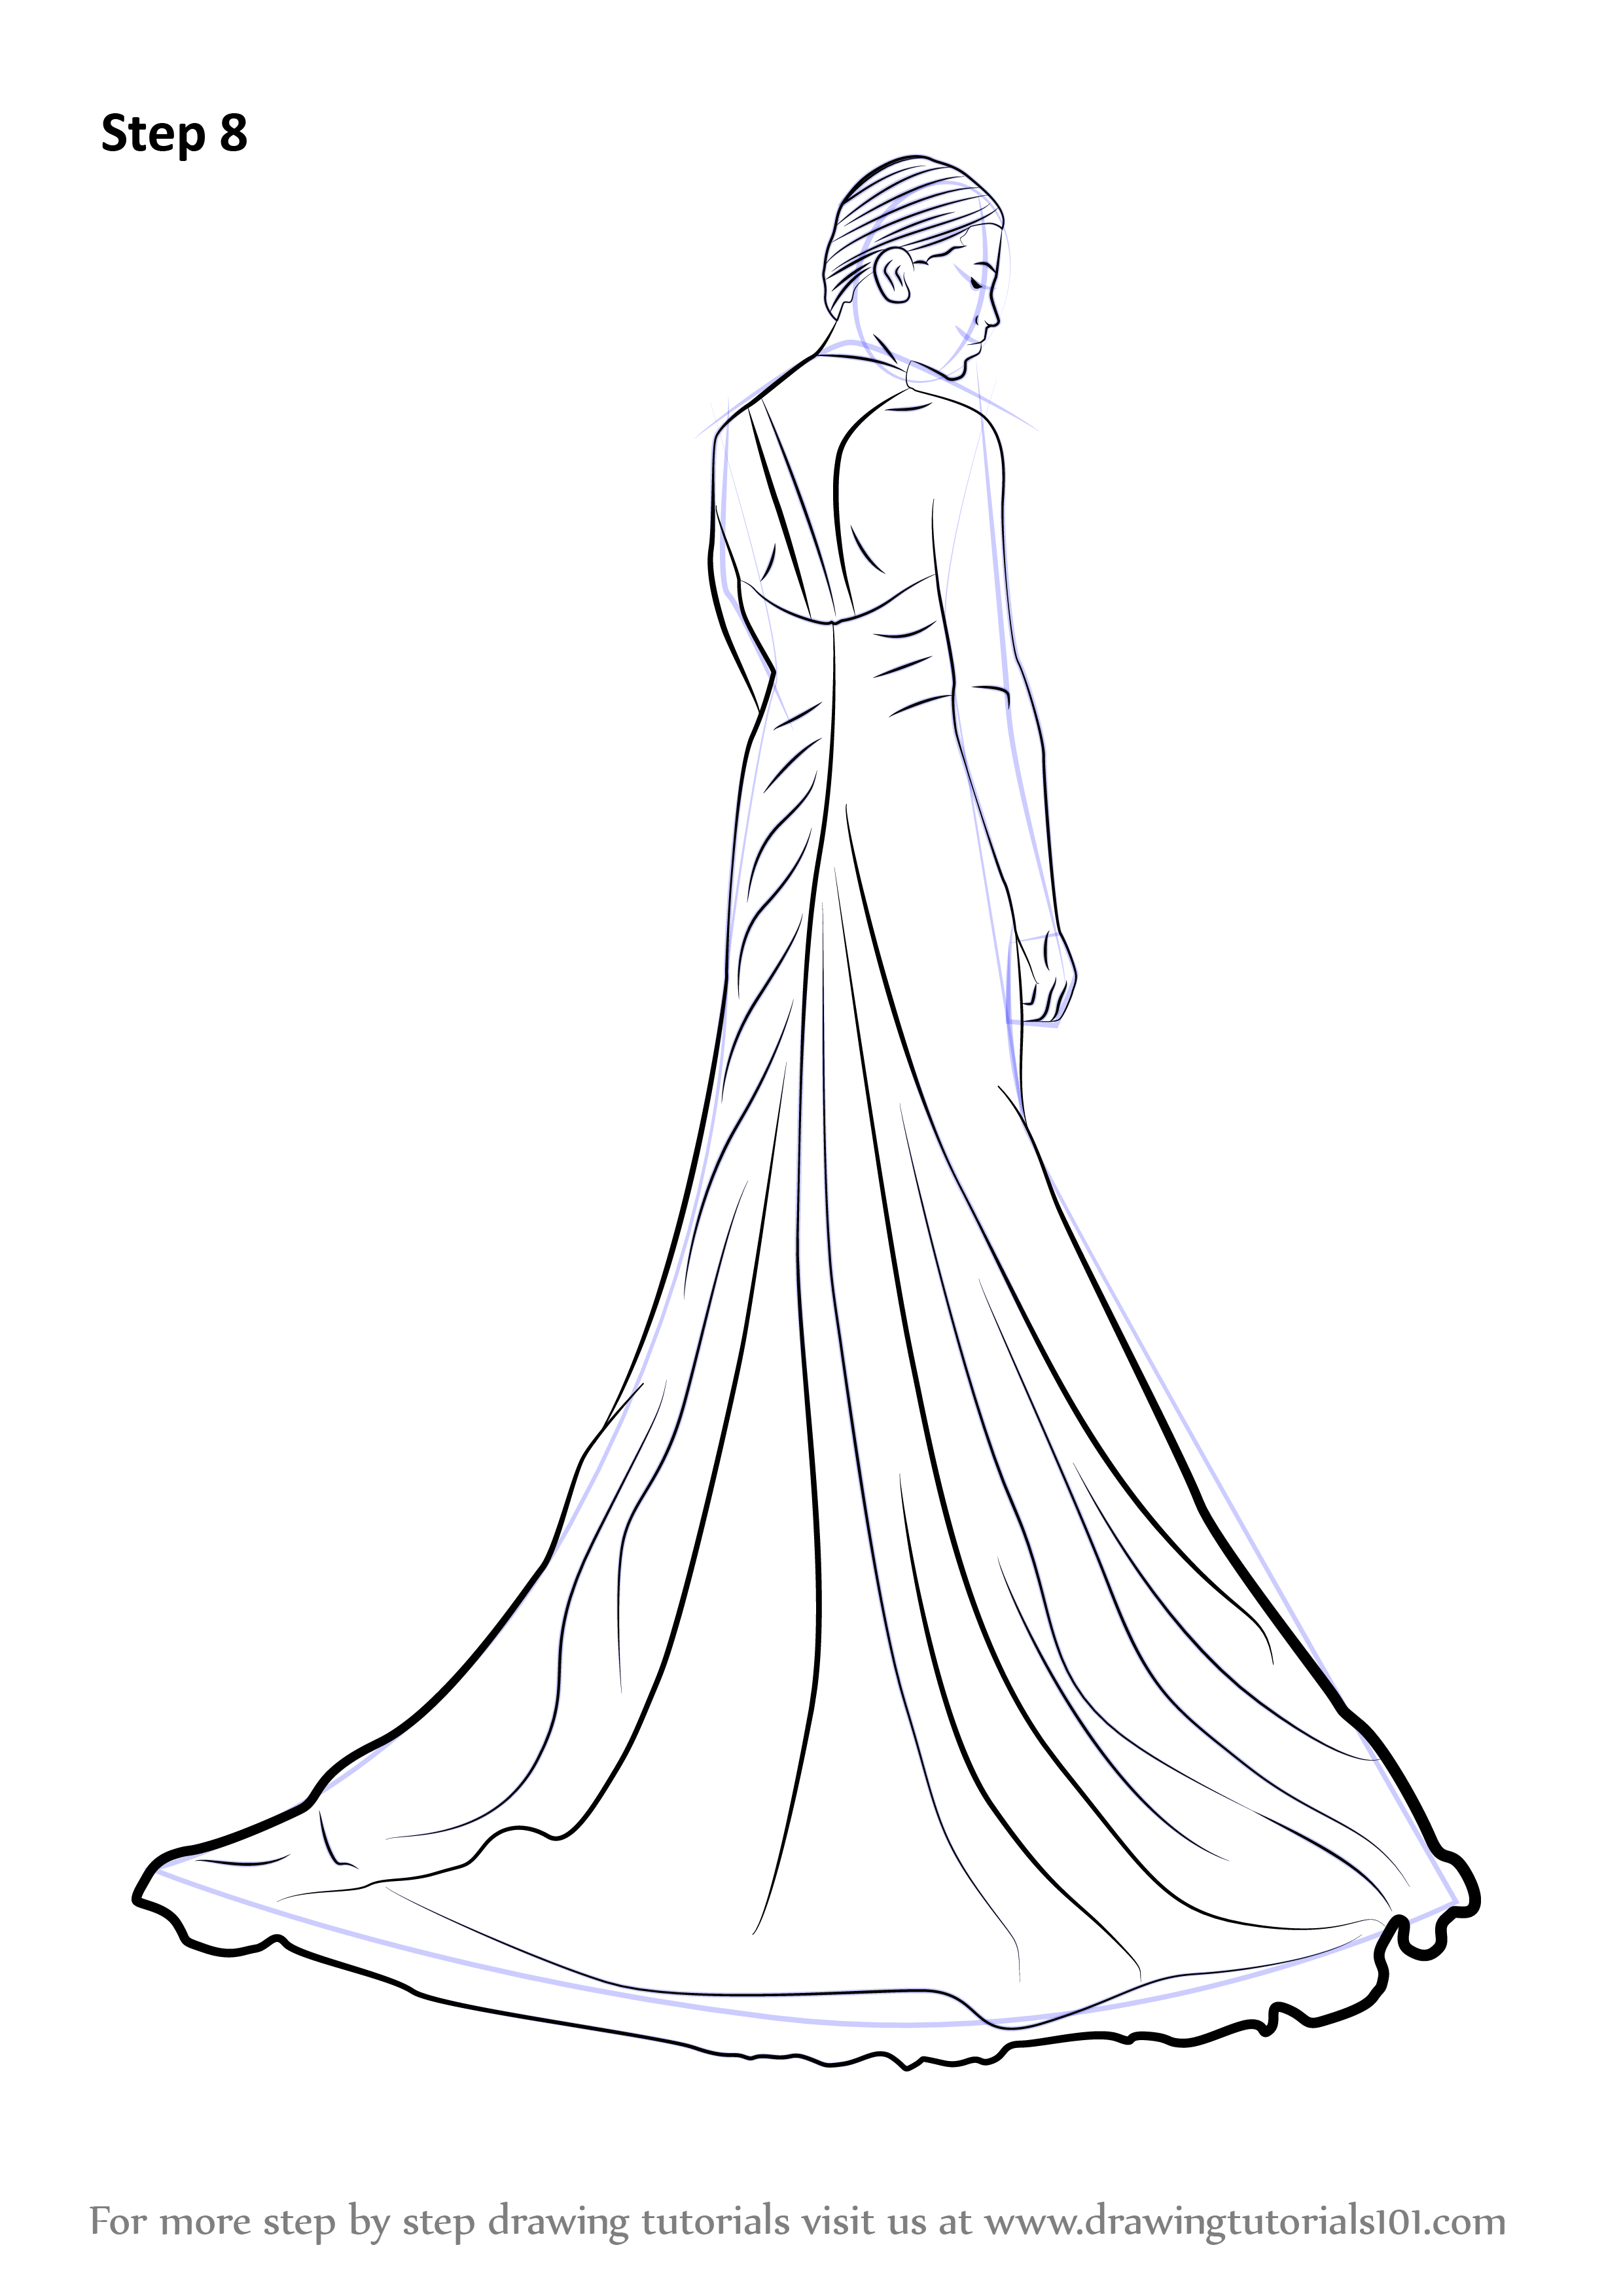 How To Draw A Wedding Dress Step By Step vlr.eng.br